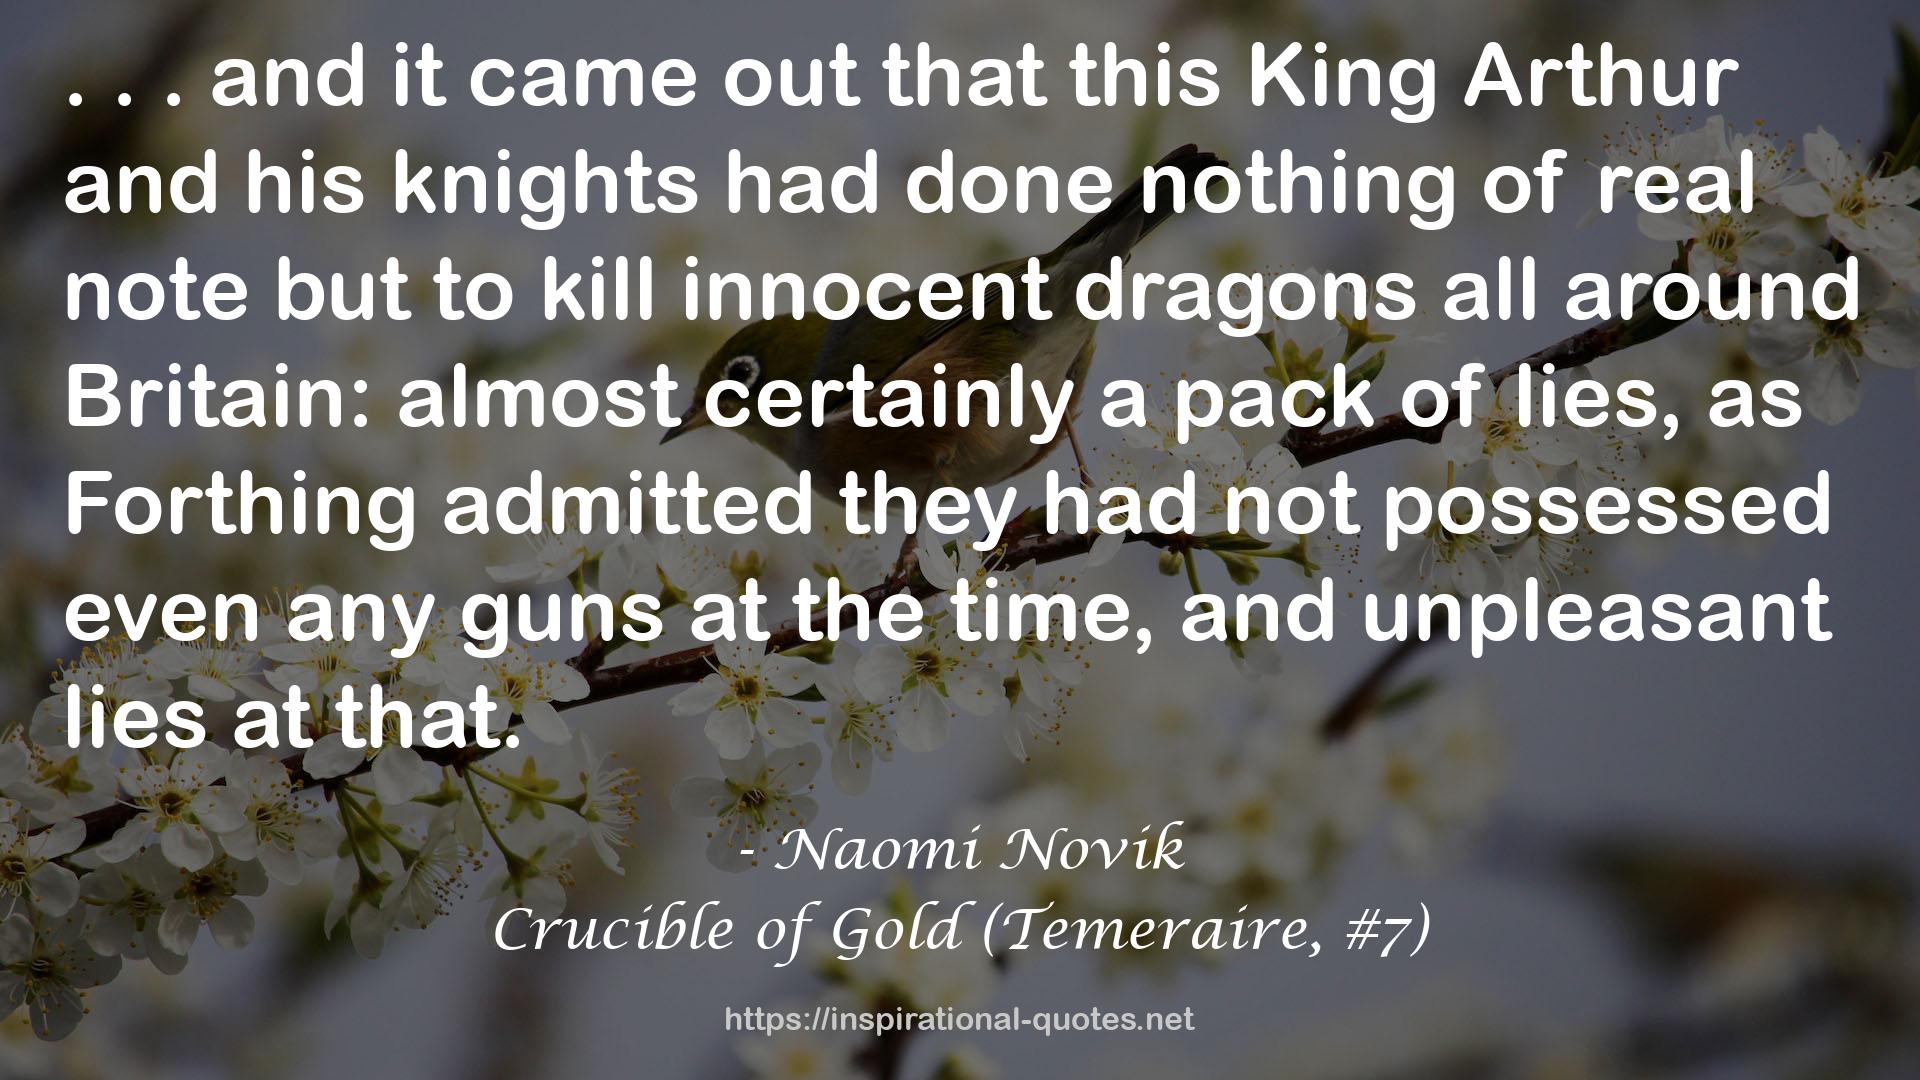 Crucible of Gold (Temeraire, #7) QUOTES